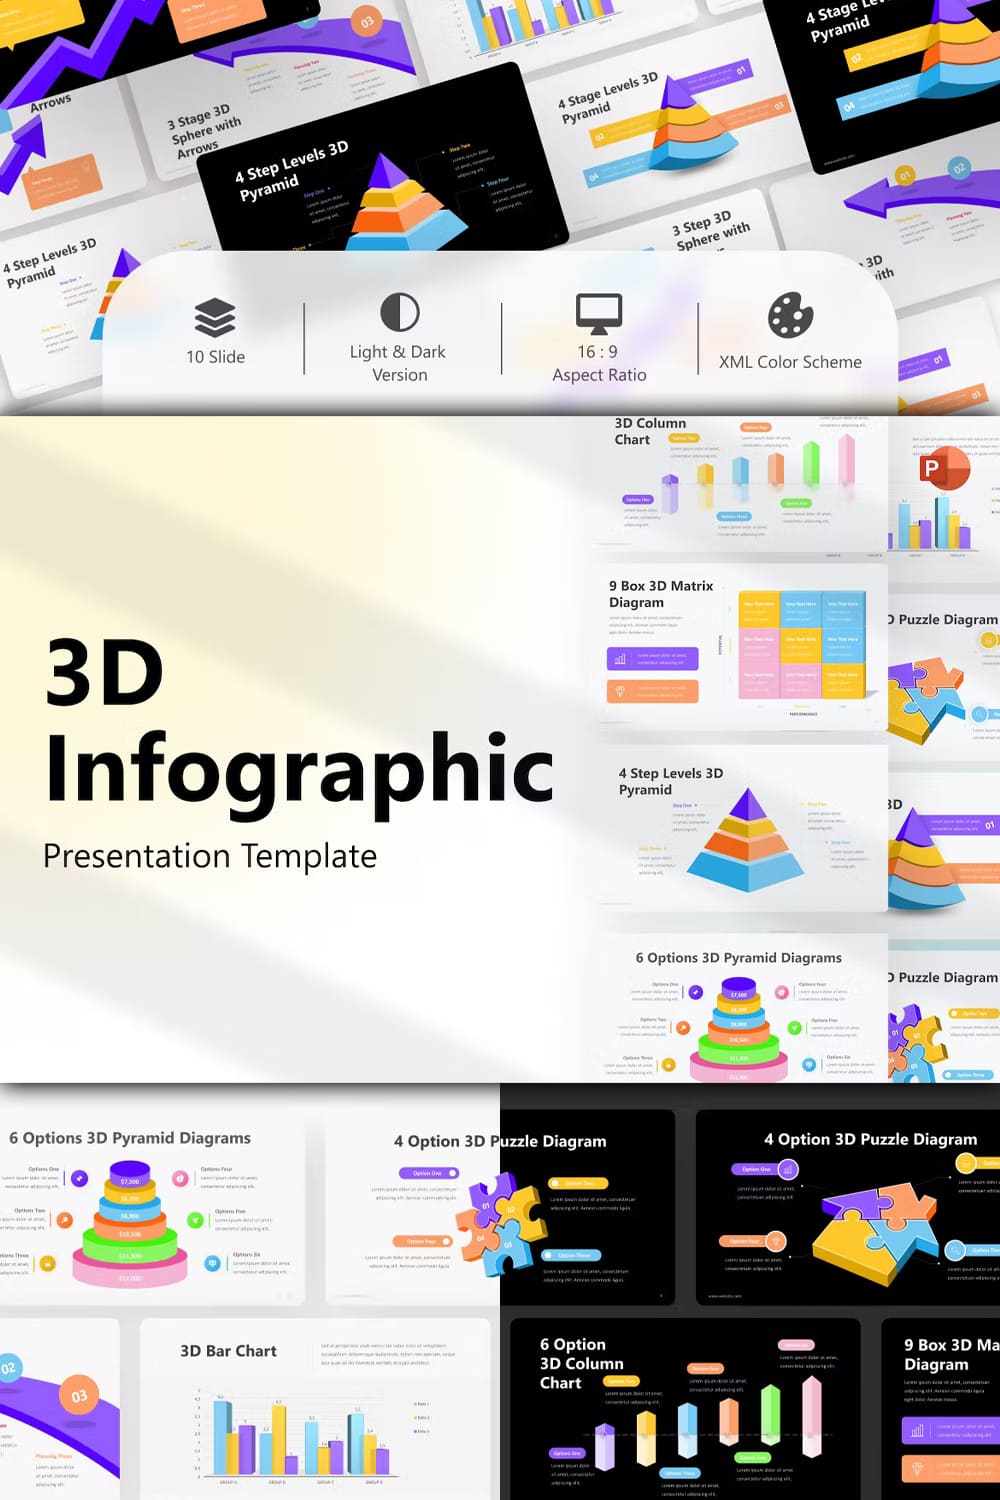 3d infographic powerpoint template - pinterest image preview.